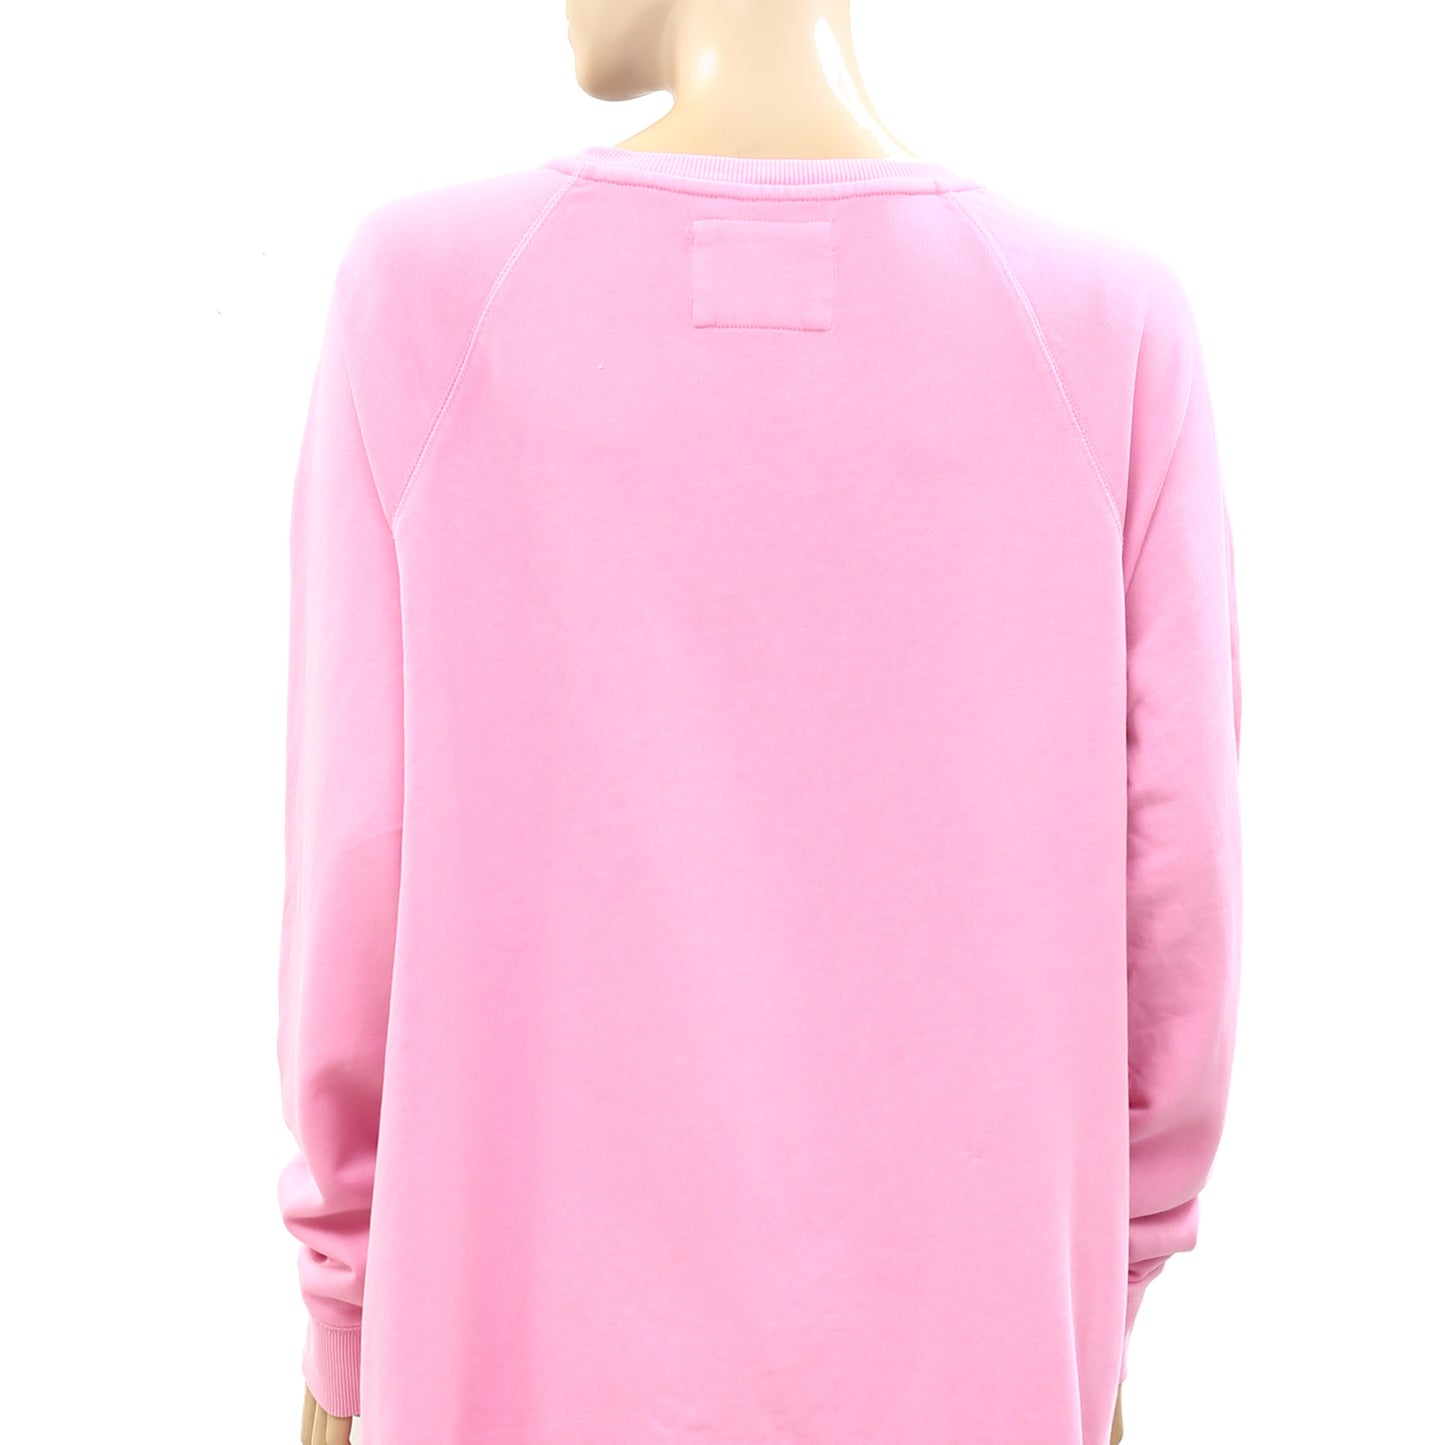 Lilly Pulitzer Luxletic Beach Comber Pullover Tunic Top